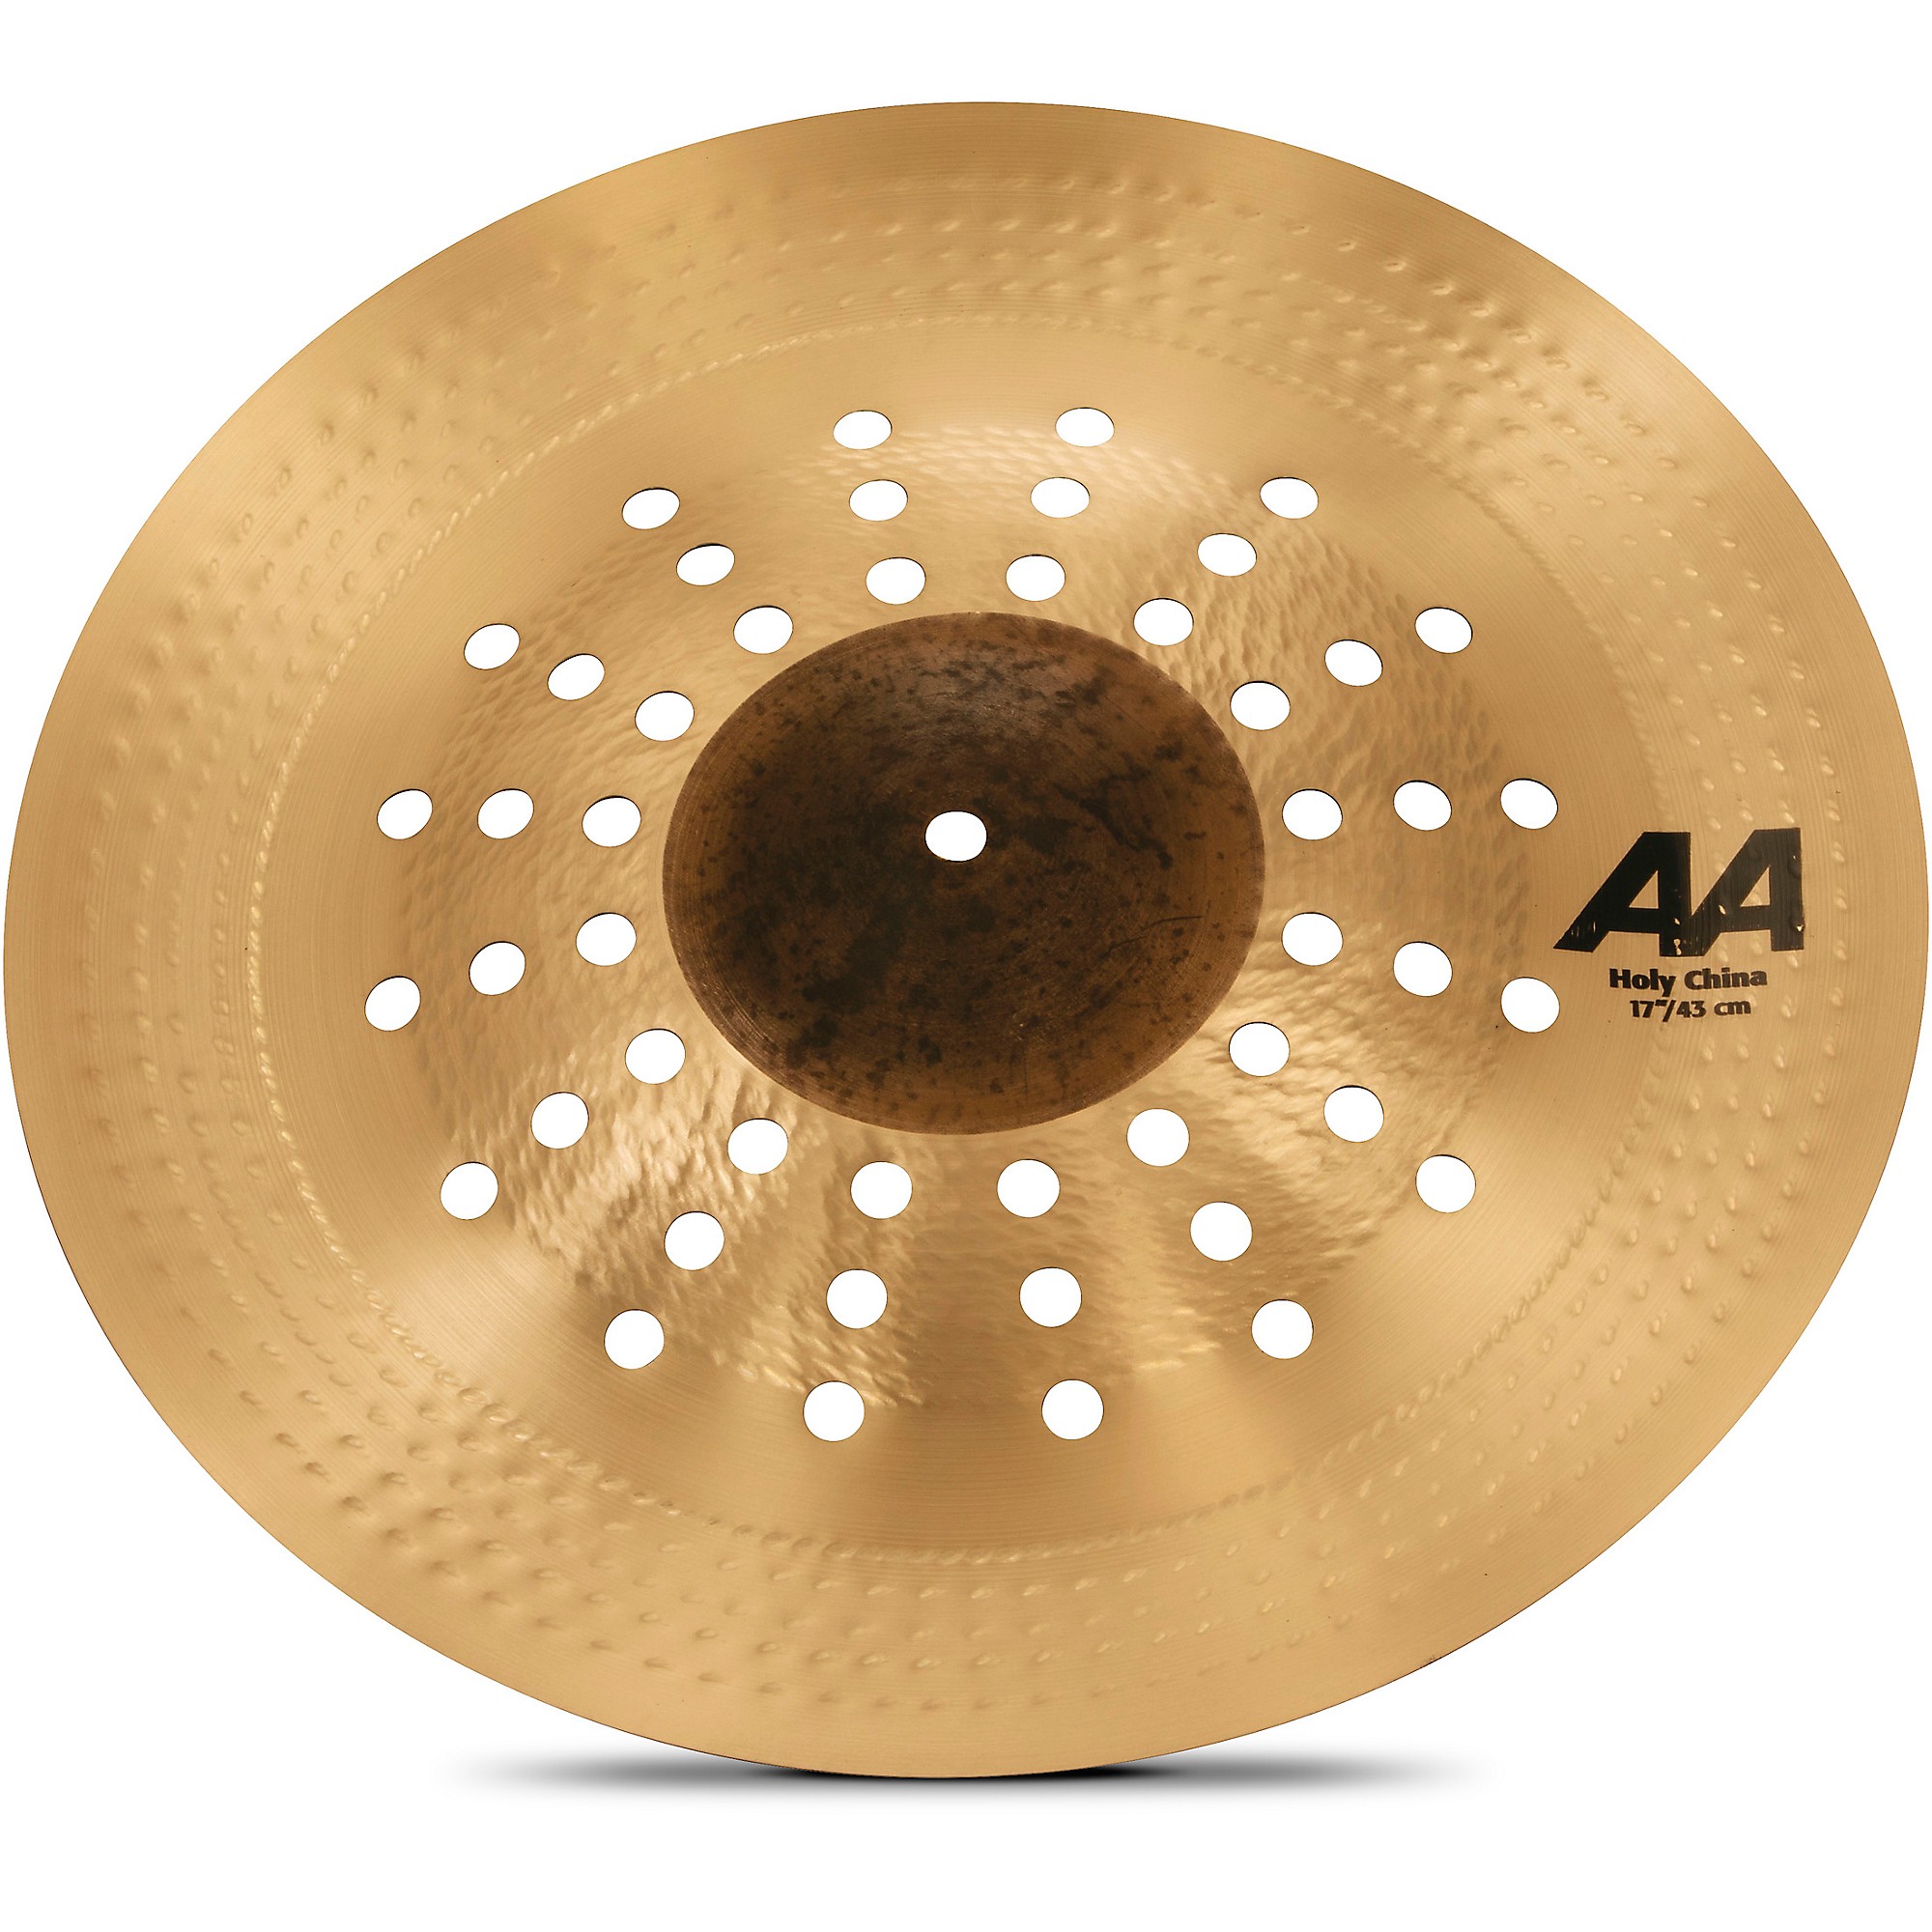 Sabian AA Holy China 17 in. | Guitar Center